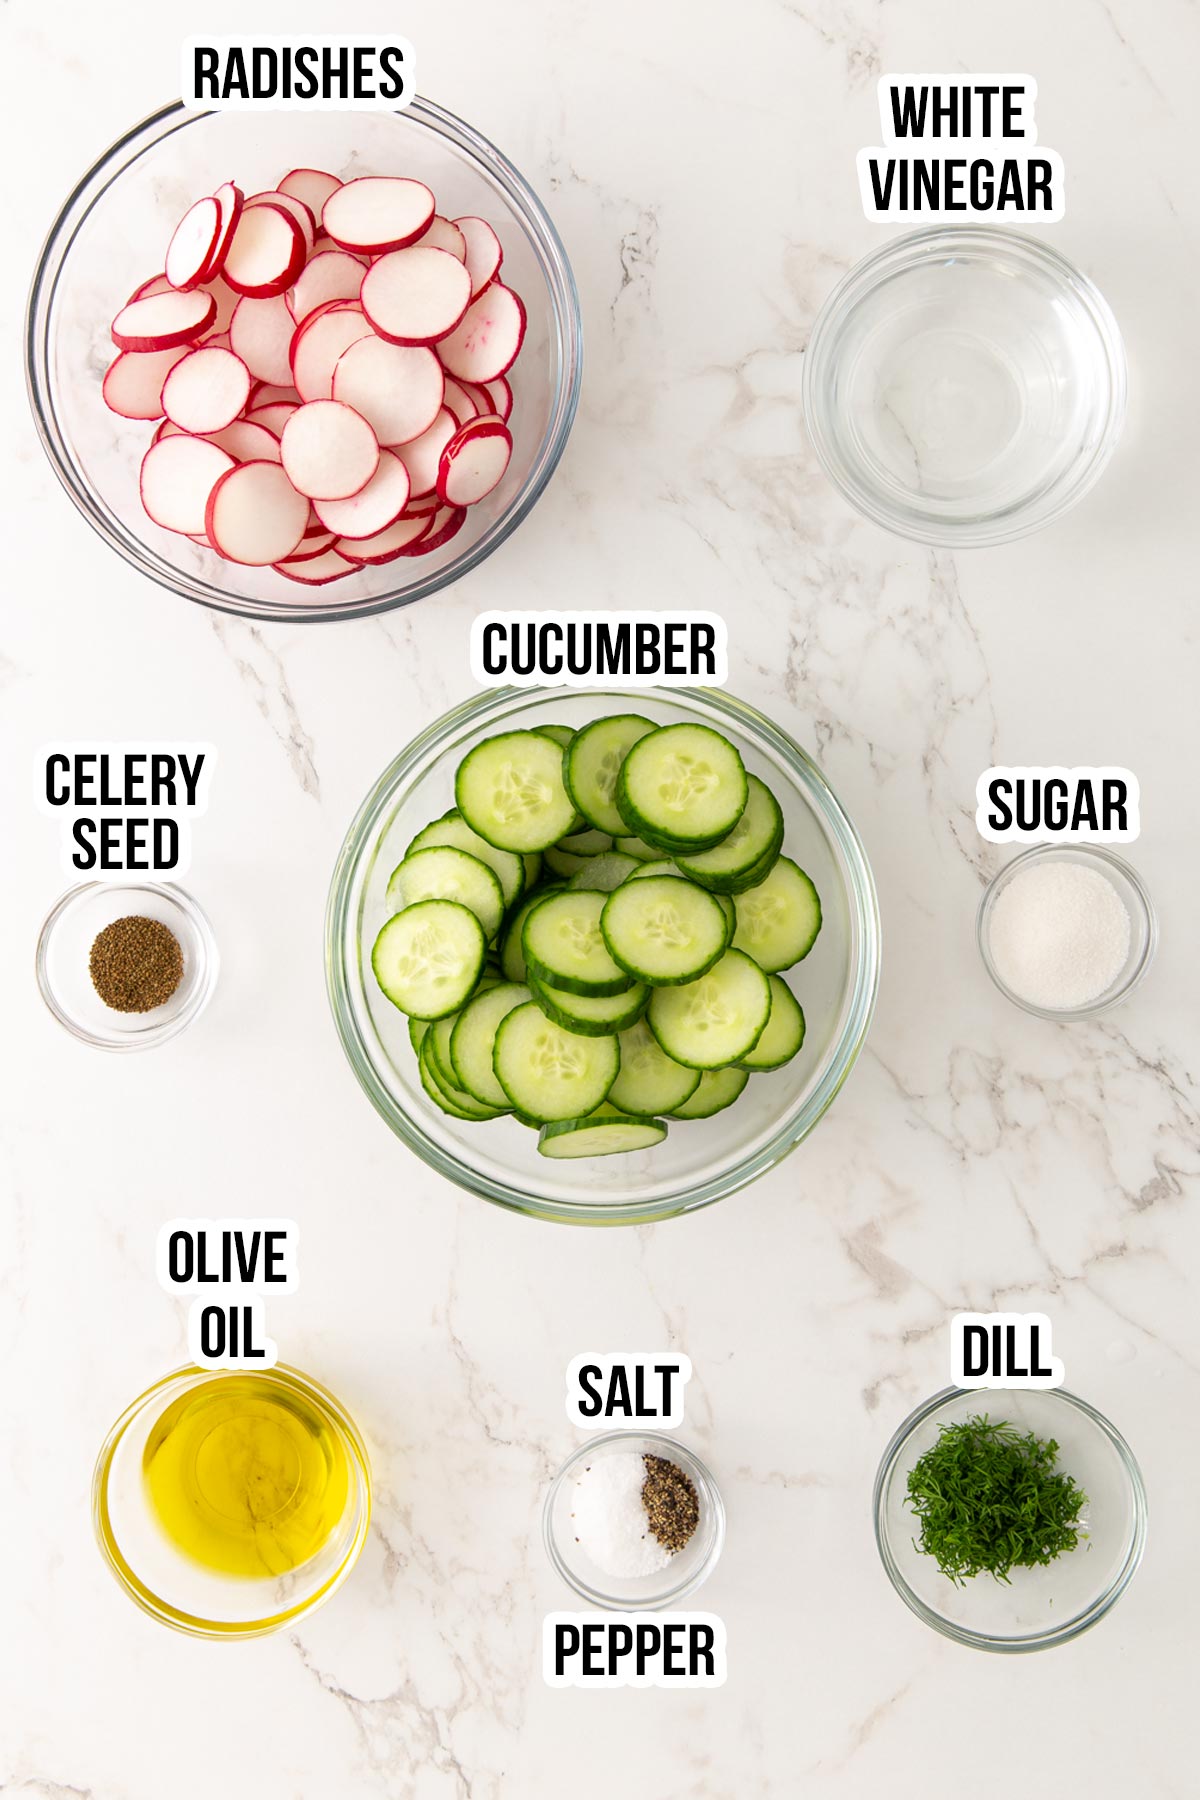 Overhead view of ingredients for cucumber radish salad with overlay text.